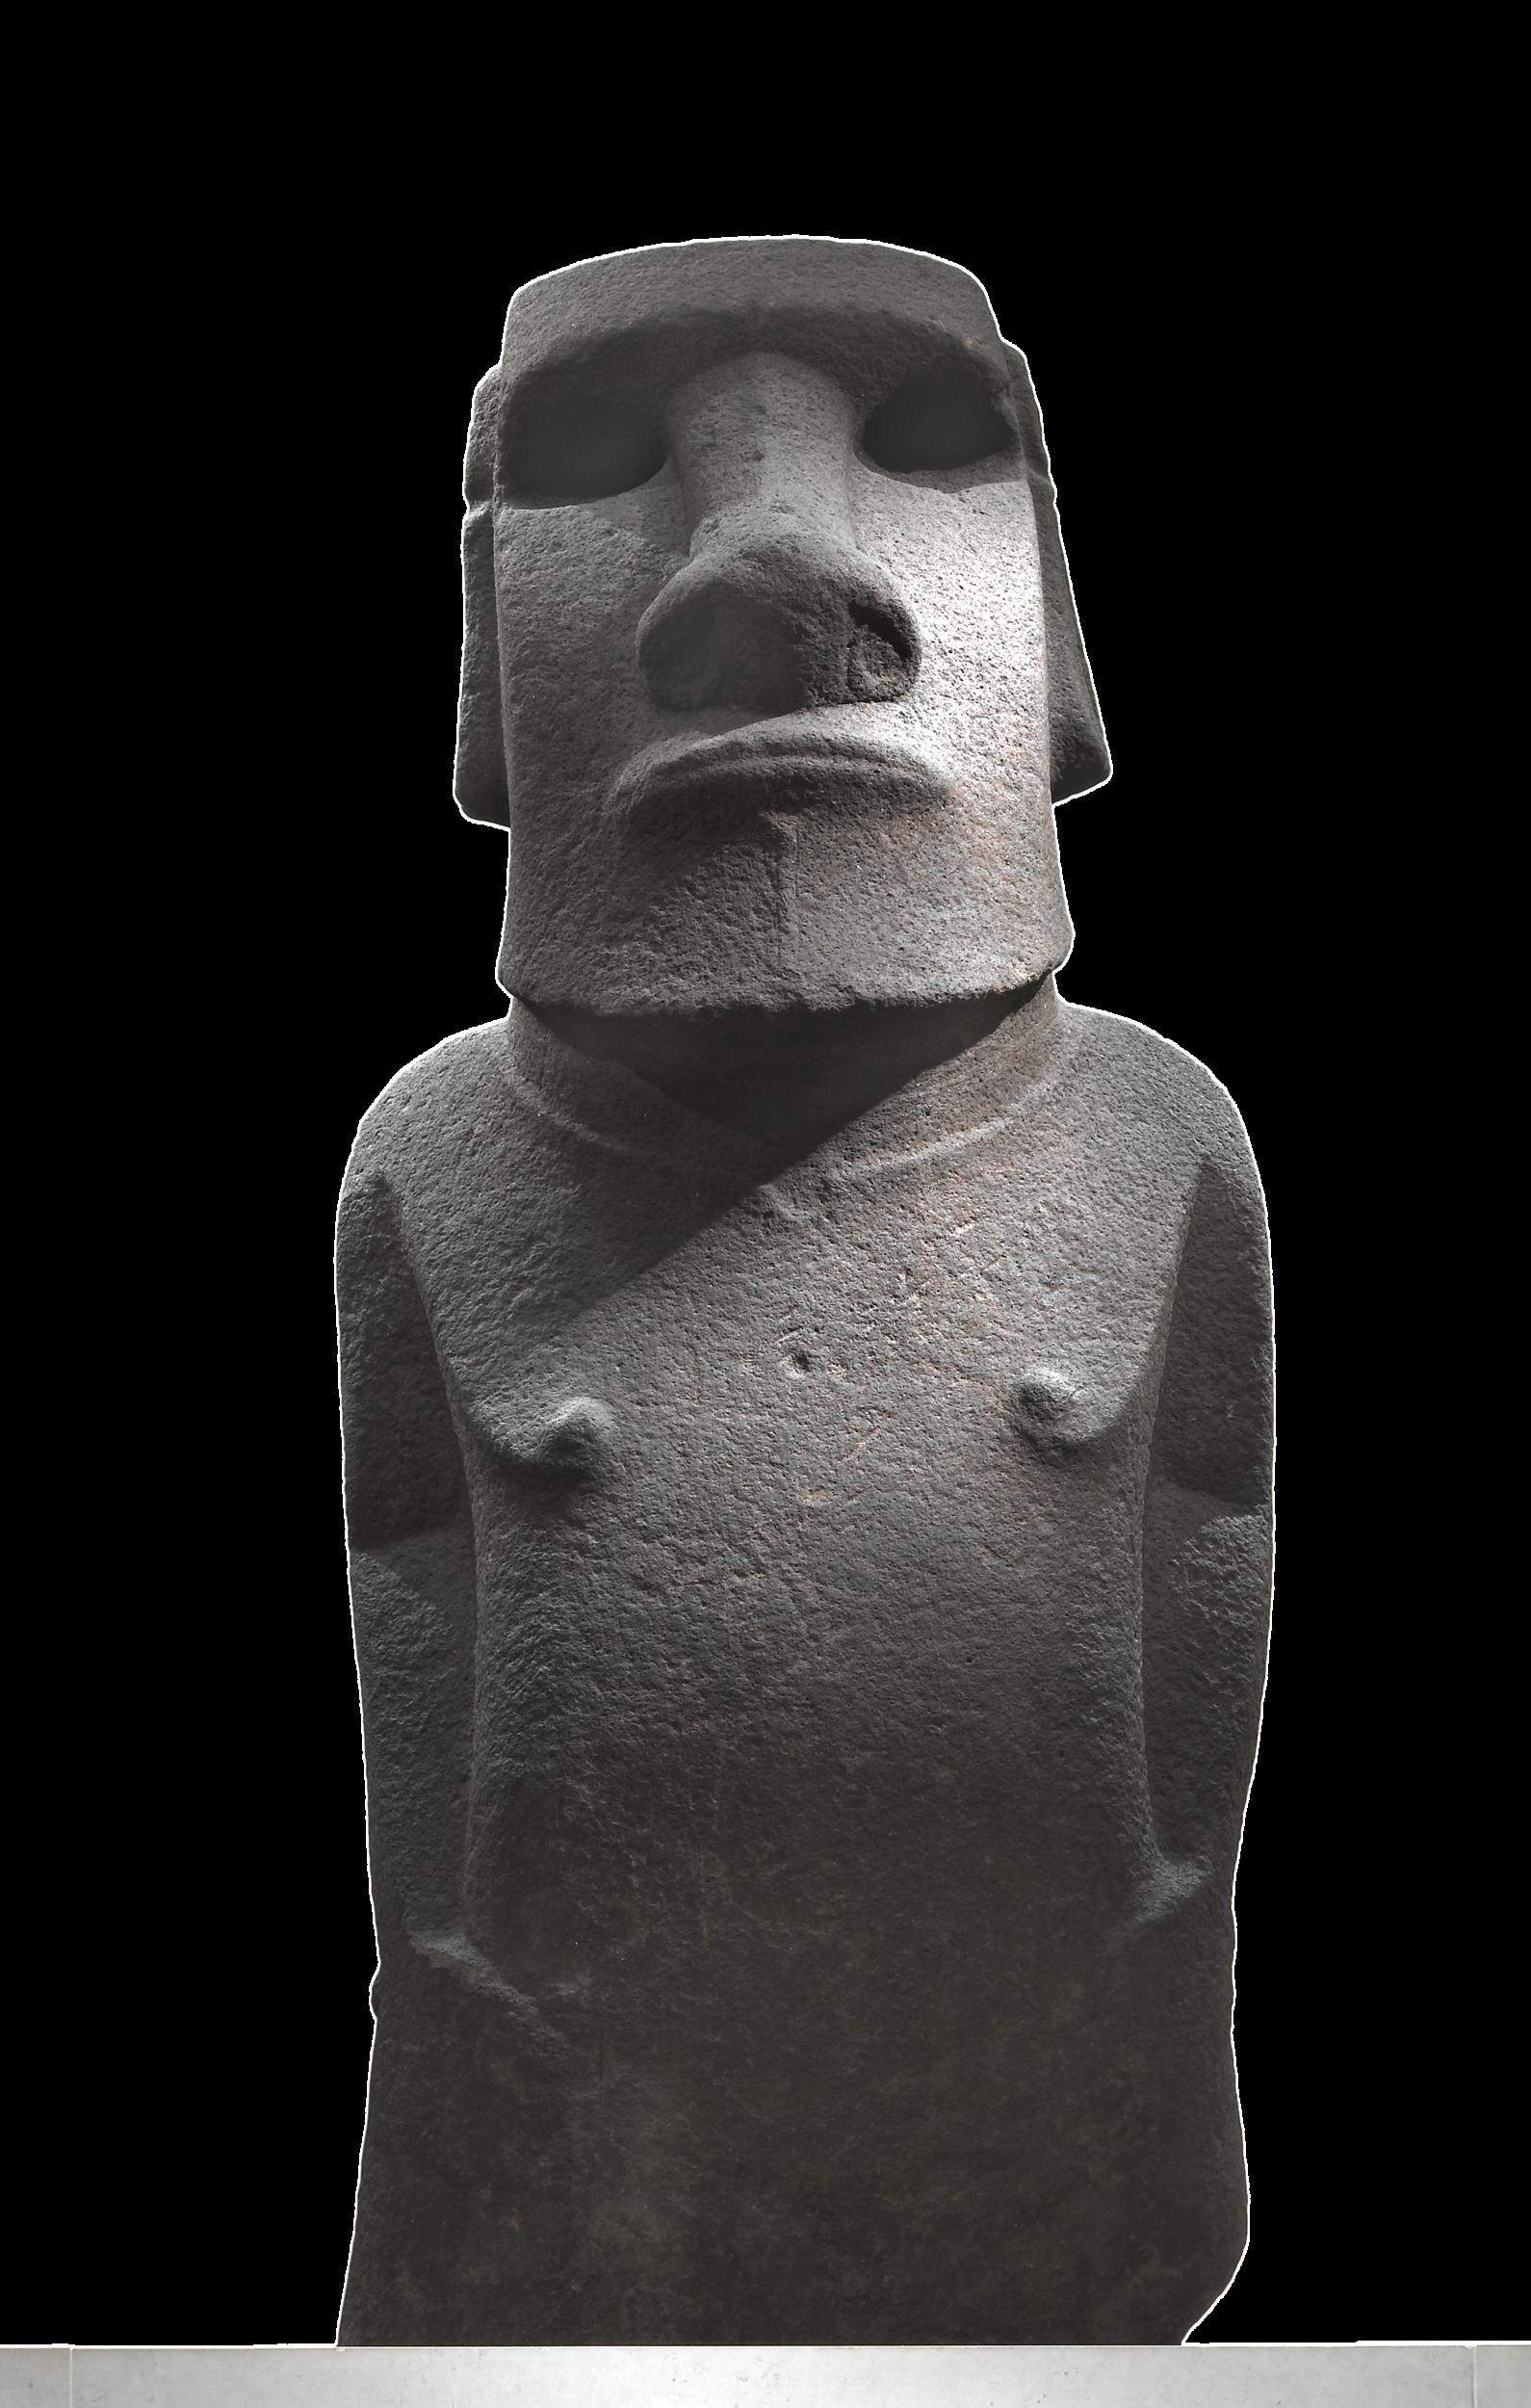 A moai in the shape of a human figure with a smaller head, large nose and lips, rectangular ears, and a torso against a black background. 